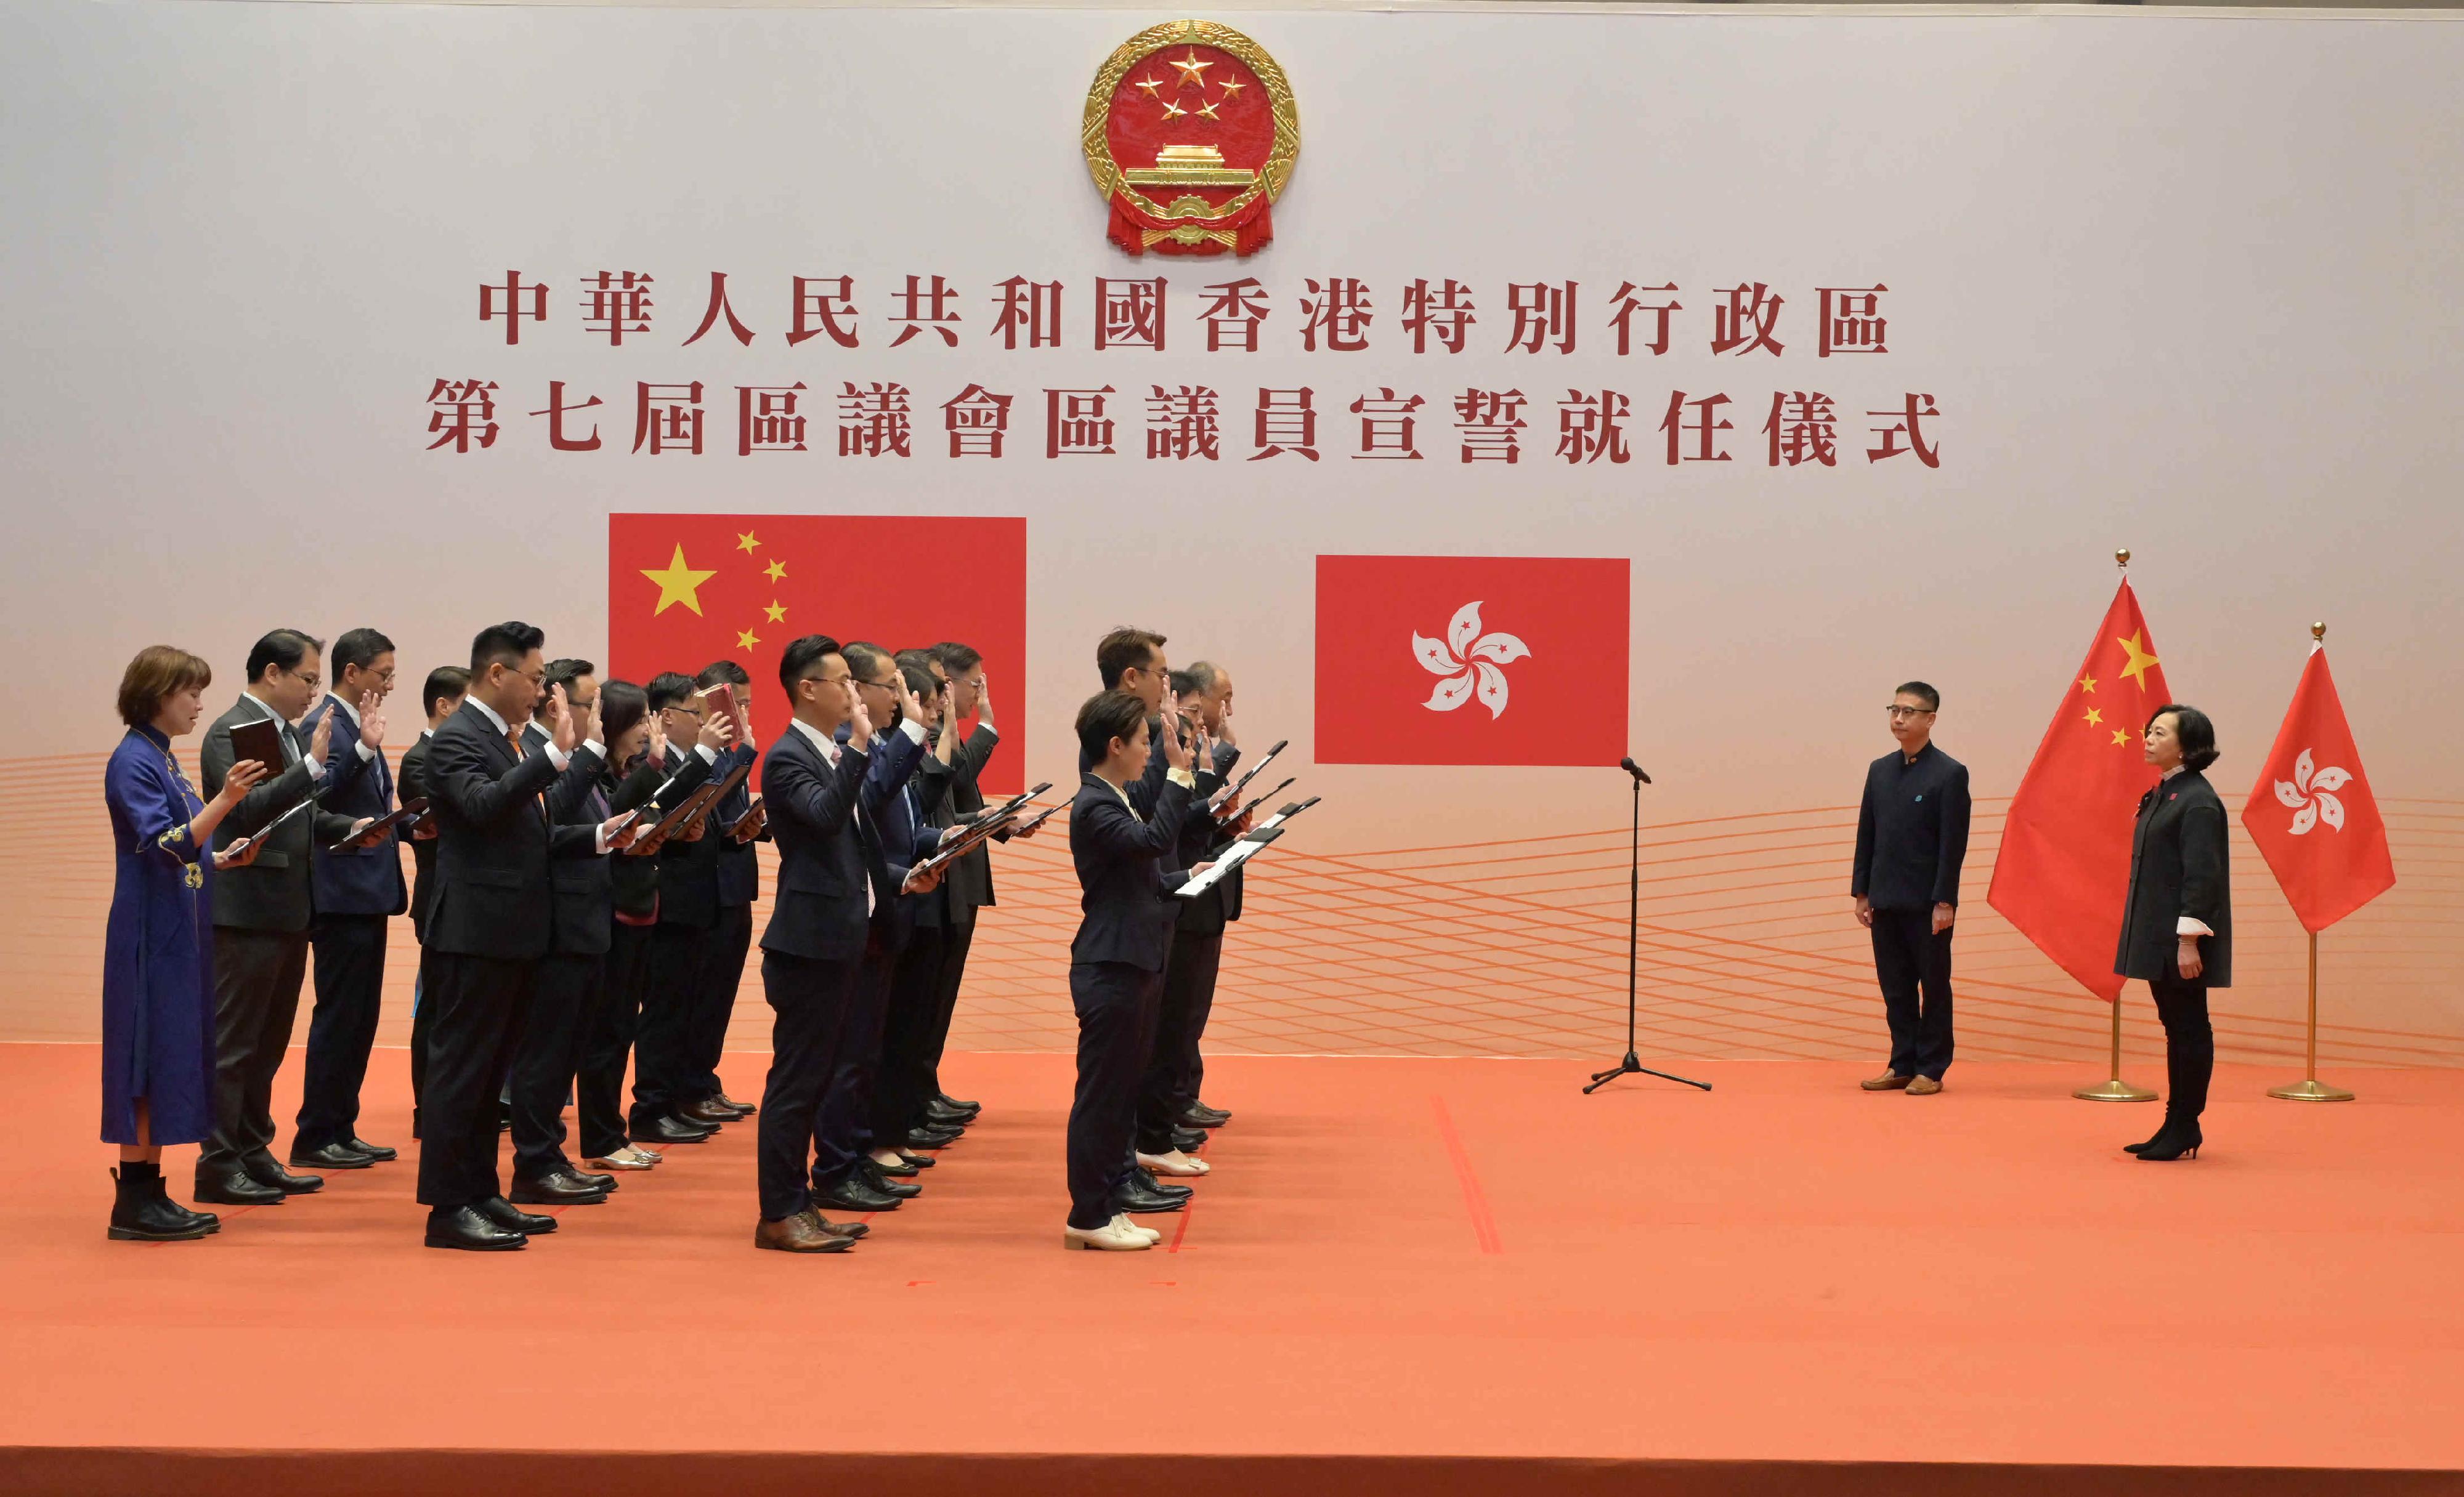 The Government held the oath-taking ceremony for members of the seventh term District Councils (DCs) at the Conference Hall of the Central Government Offices today (January 1). Photo shows the Secretary for Home and Youth Affairs, Miss Alice Mak (first right), being the oath administrator authorised by the Chief Executive, administering the oath-taking by DC members from Yau Tsim Mong District at the ceremony.